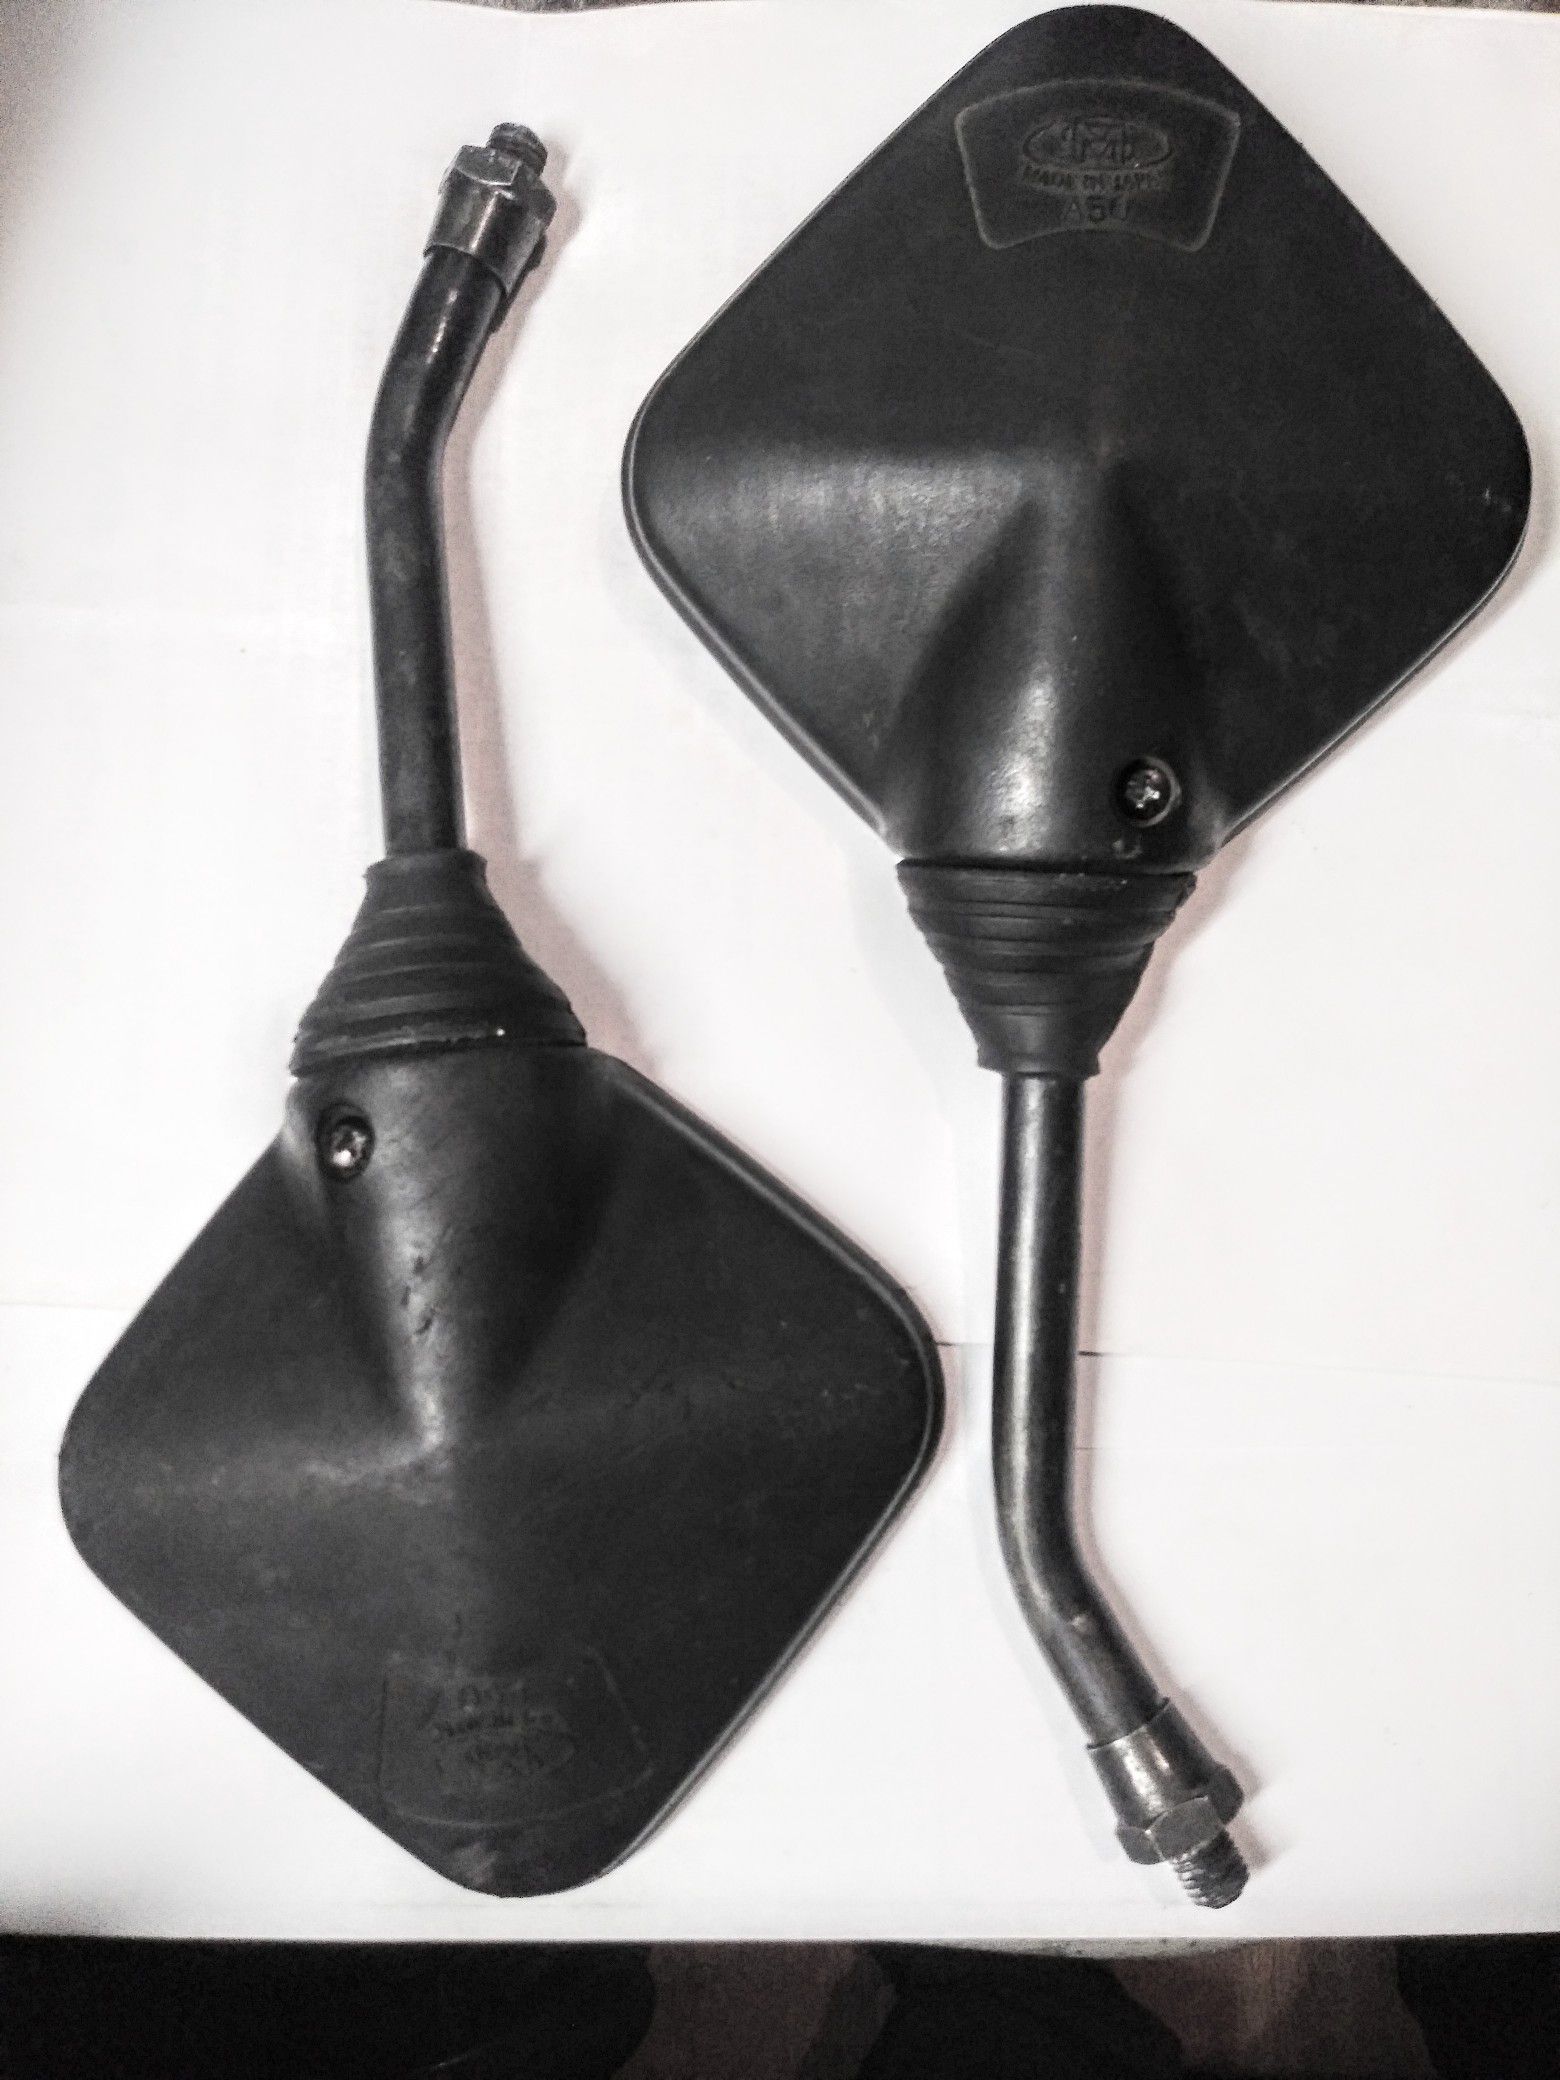 Honda XLR 600 or any motorcycle left and right side mirrors